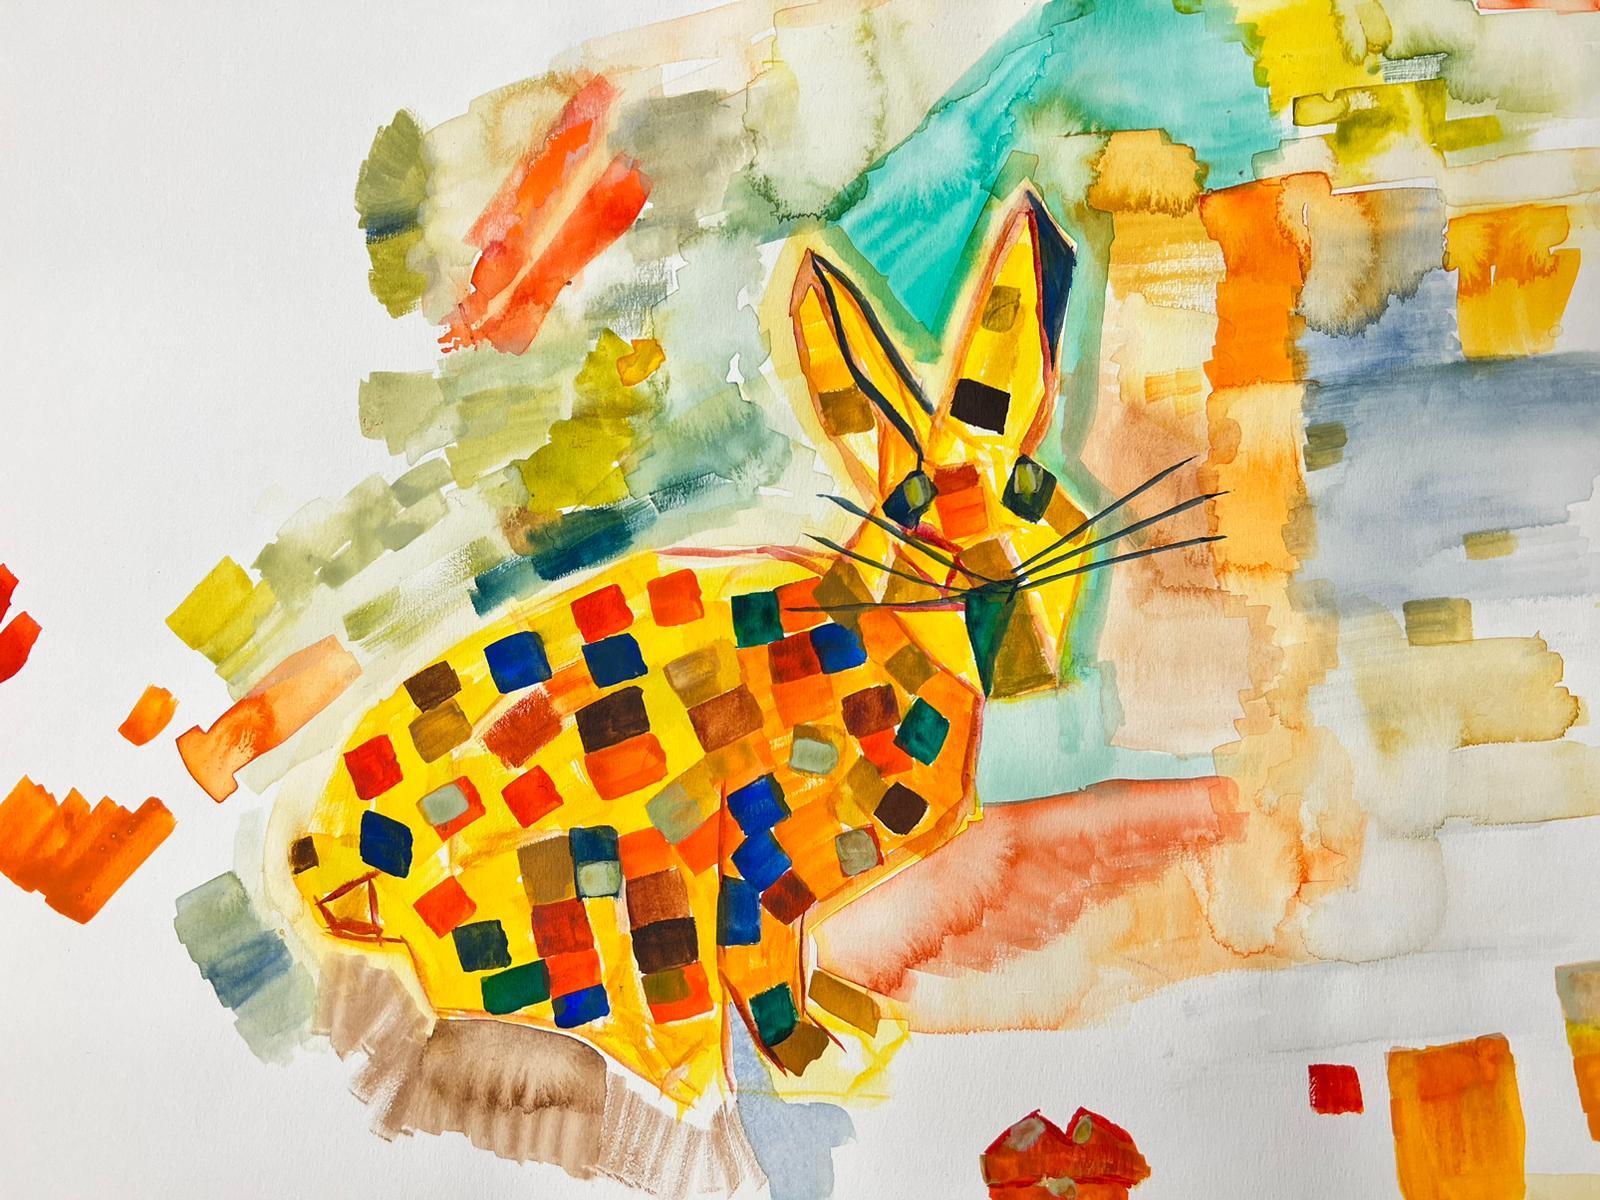 Irish contemporary Animal Art - March Hare Colorful Irish Contemporary Abstract Painting cubist work of a hare